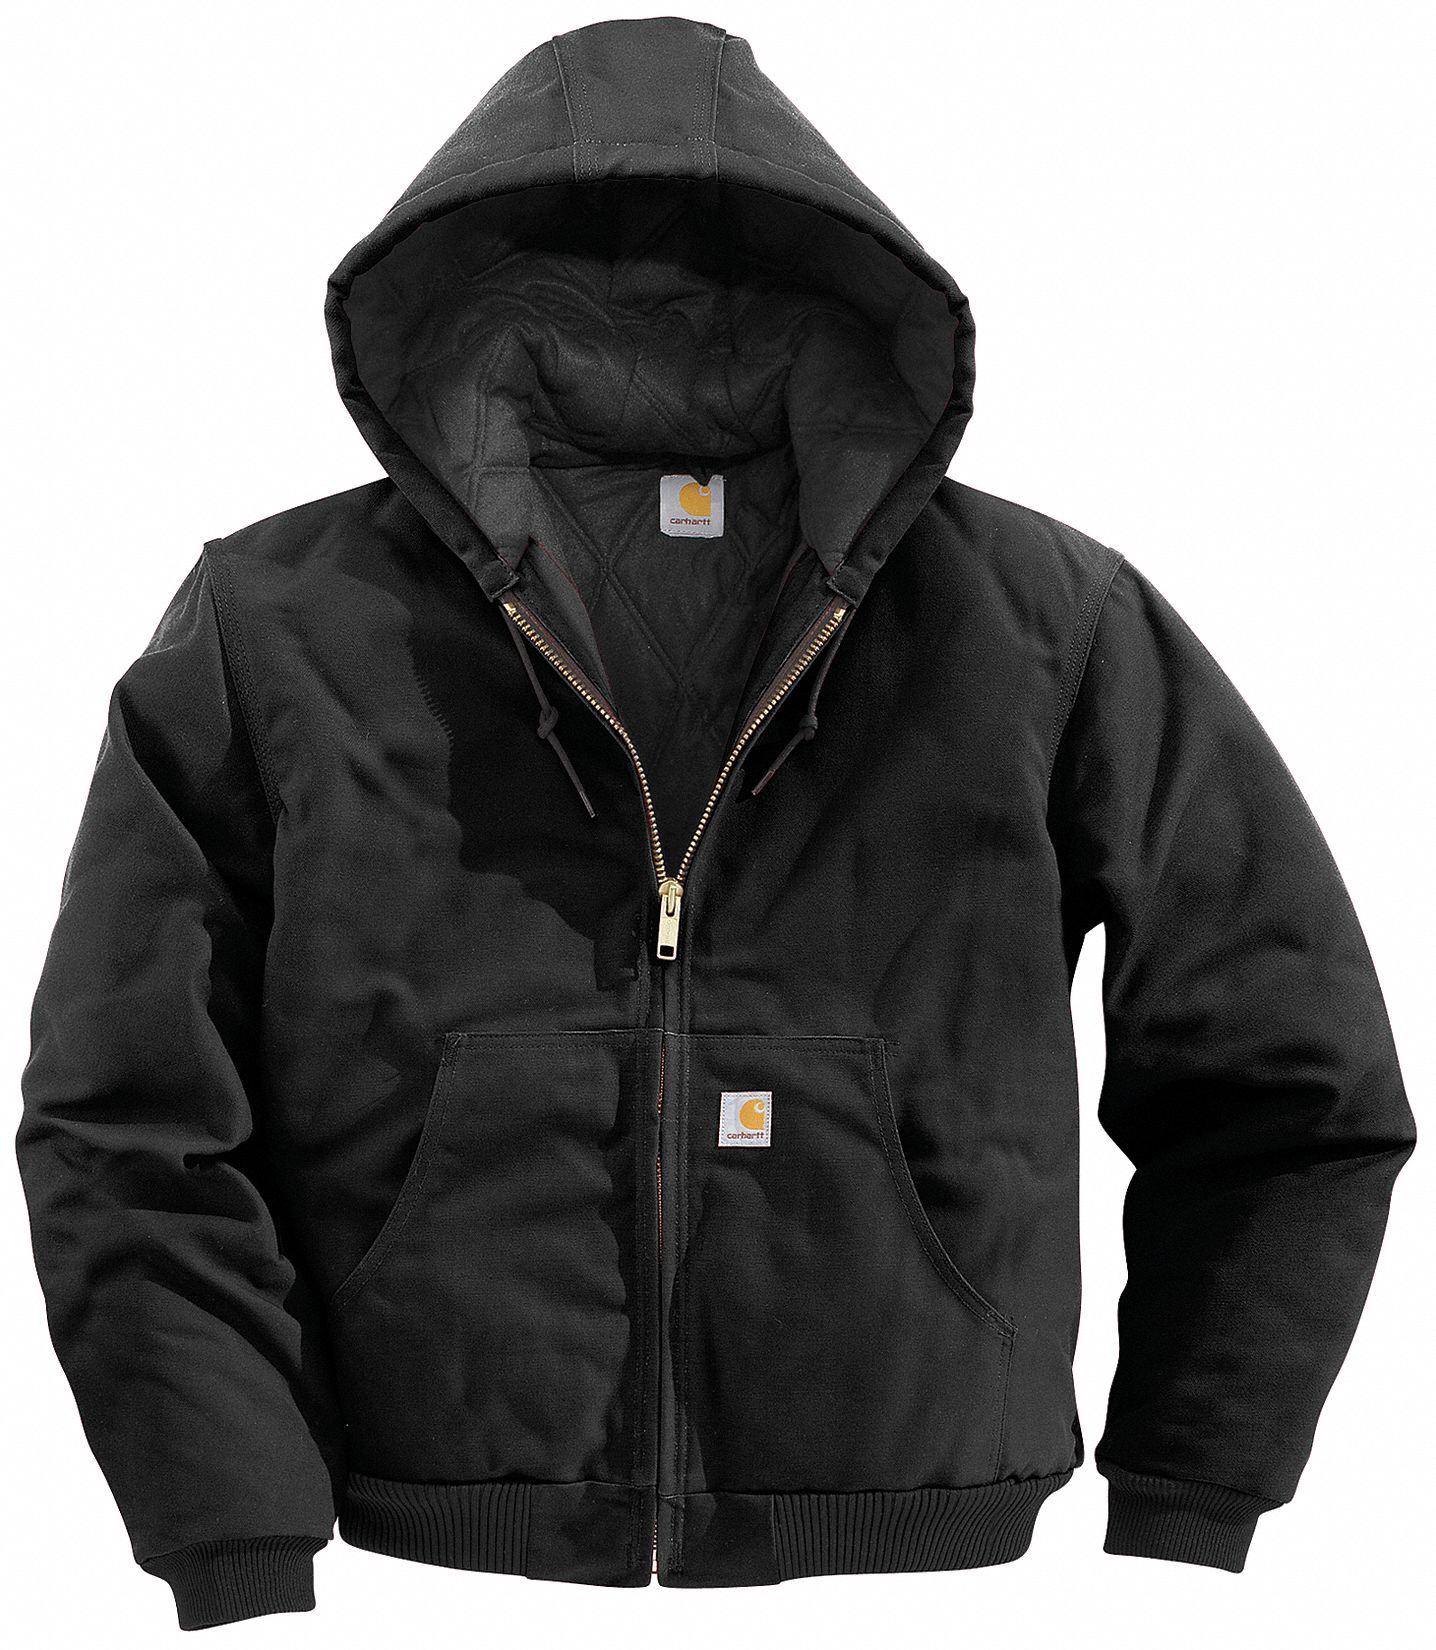 MEN'S HOODED JACKET, 4XL, BLACK, TALL, COTTON, 12 OZ, INSULATED